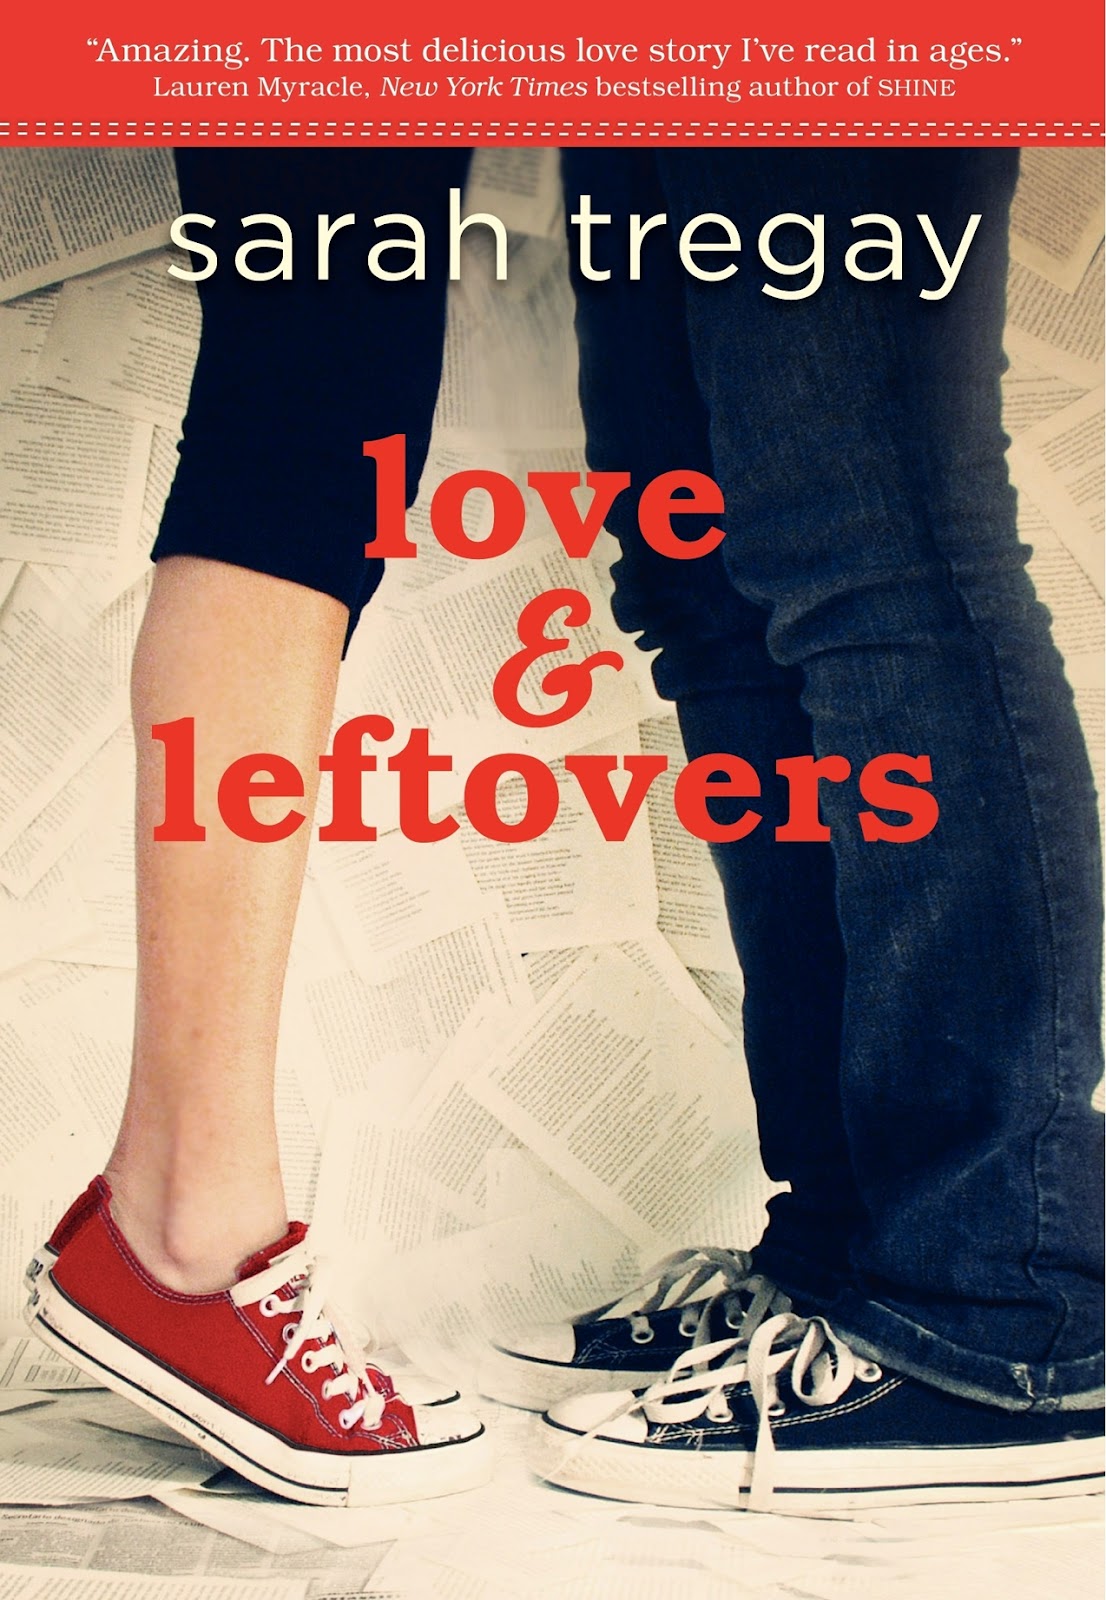 the leftovers book 2